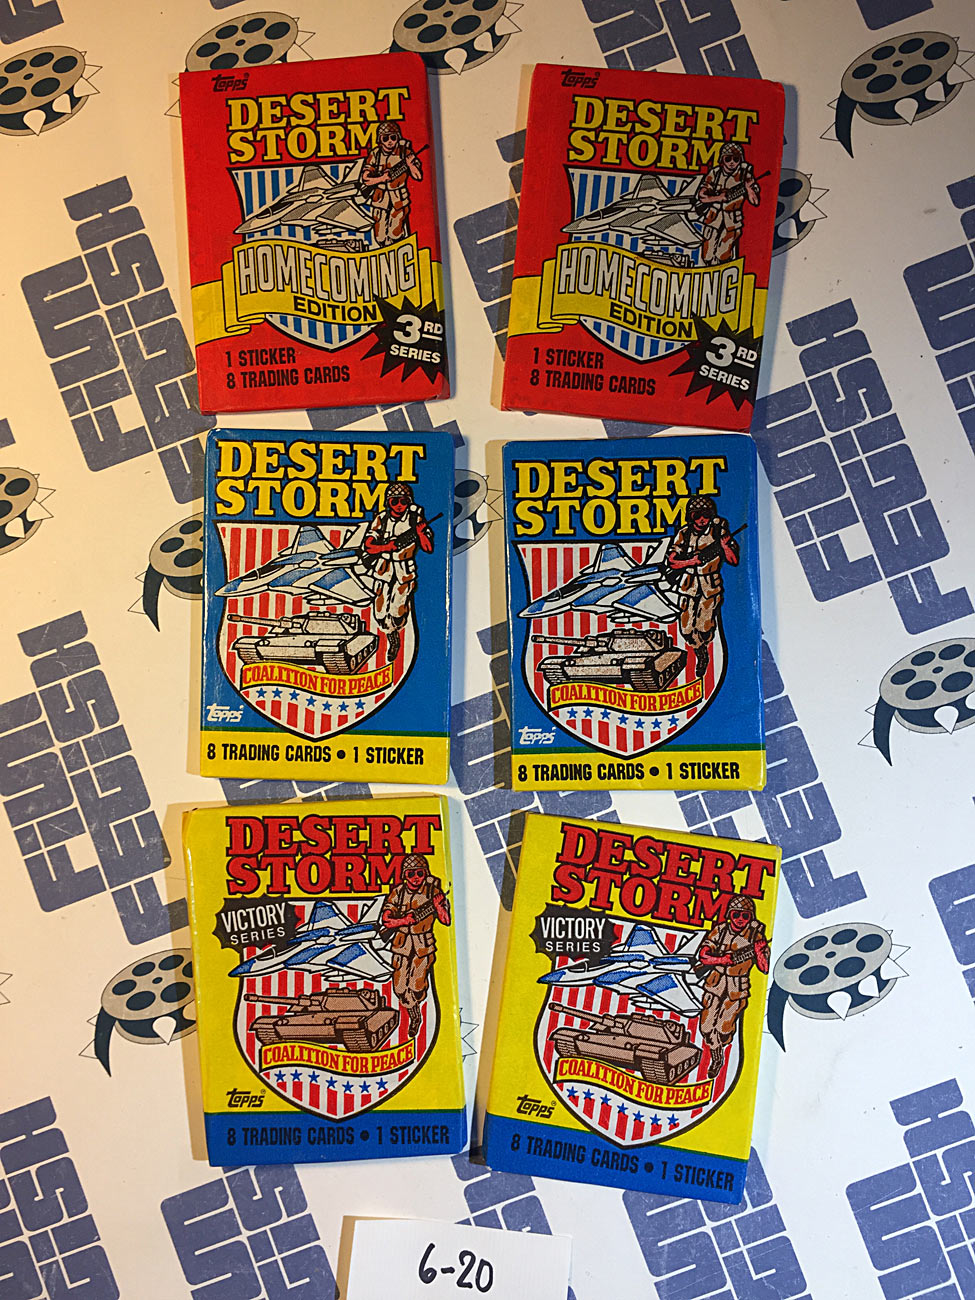 Set of 6 Sealed Topps Desert Storm Trading Card Wax Packs, Homecoming, Coalition For Peace, Victory Series [620]